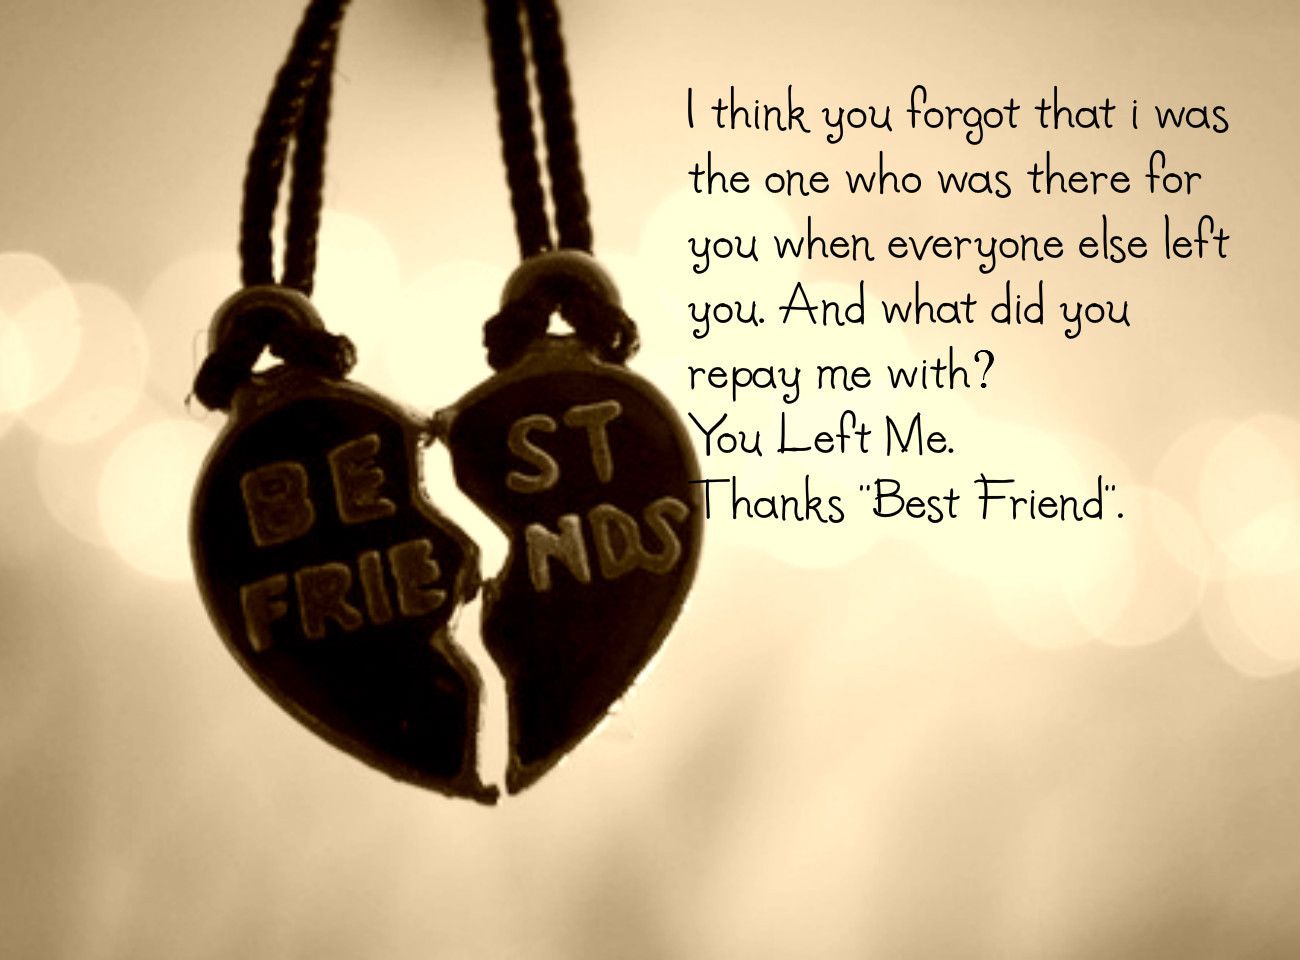 cute friendship quote wallpapers